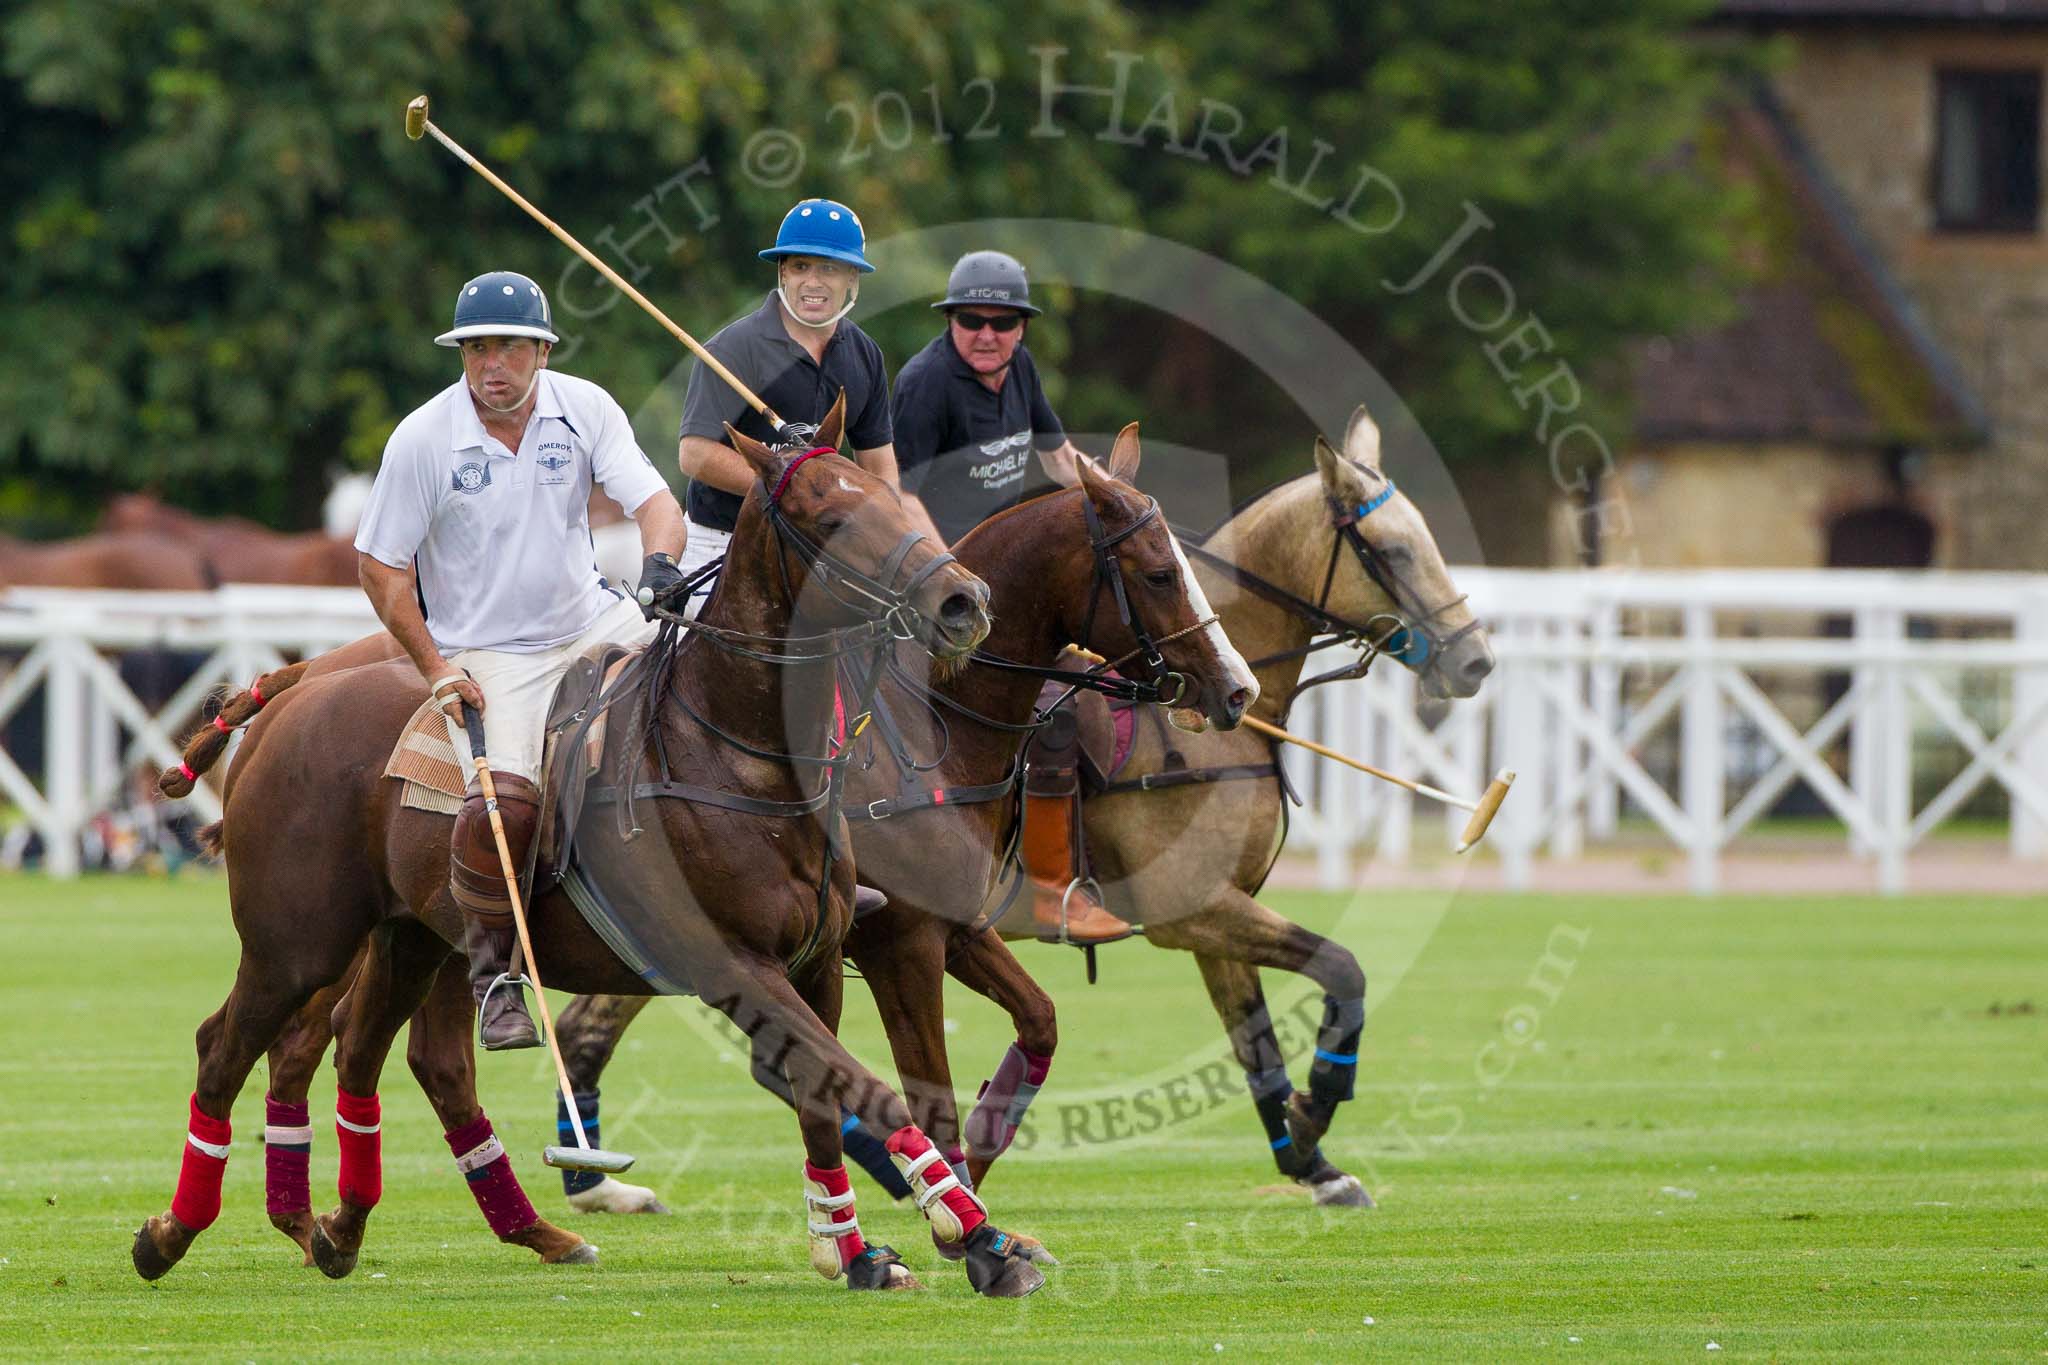 DBPC Polo in the Park 2012: The Inn Team #4, Offchurch Bury #1 and #2..
Dallas Burston Polo Club,
Stoneythorpe Estate,
Southam,
Warwickshire,
United Kingdom,
on 16 September 2012 at 15:02, image #230